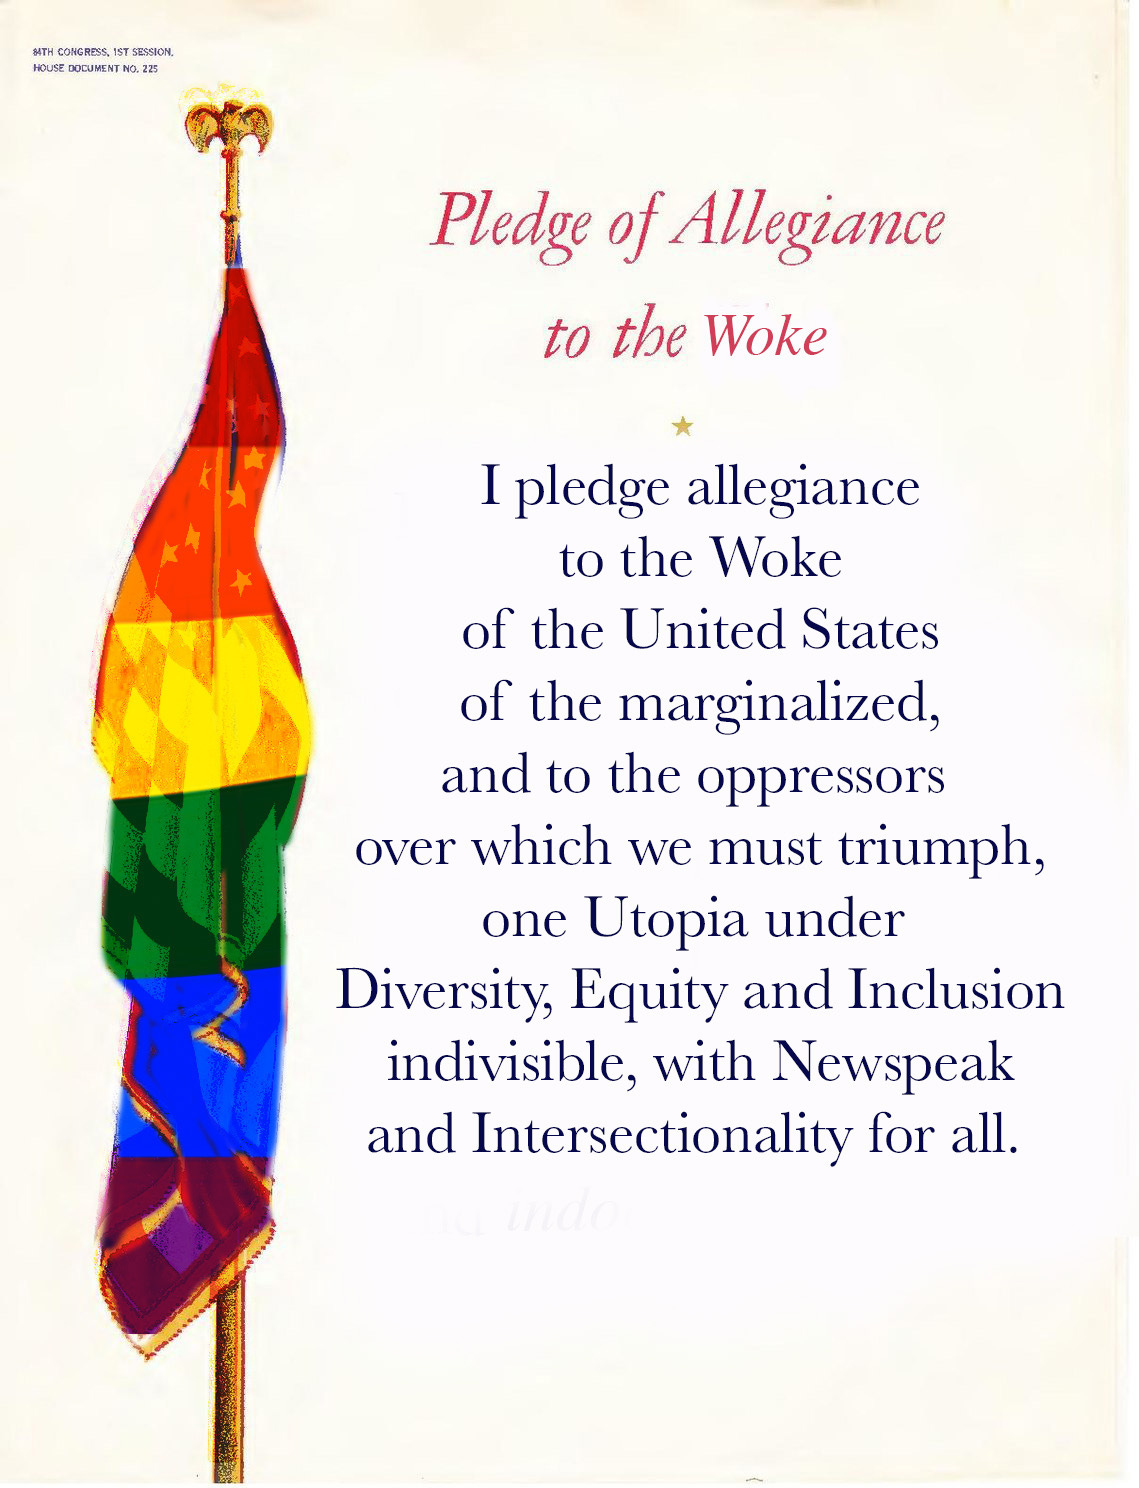 The Pledge of Allegiance to the 